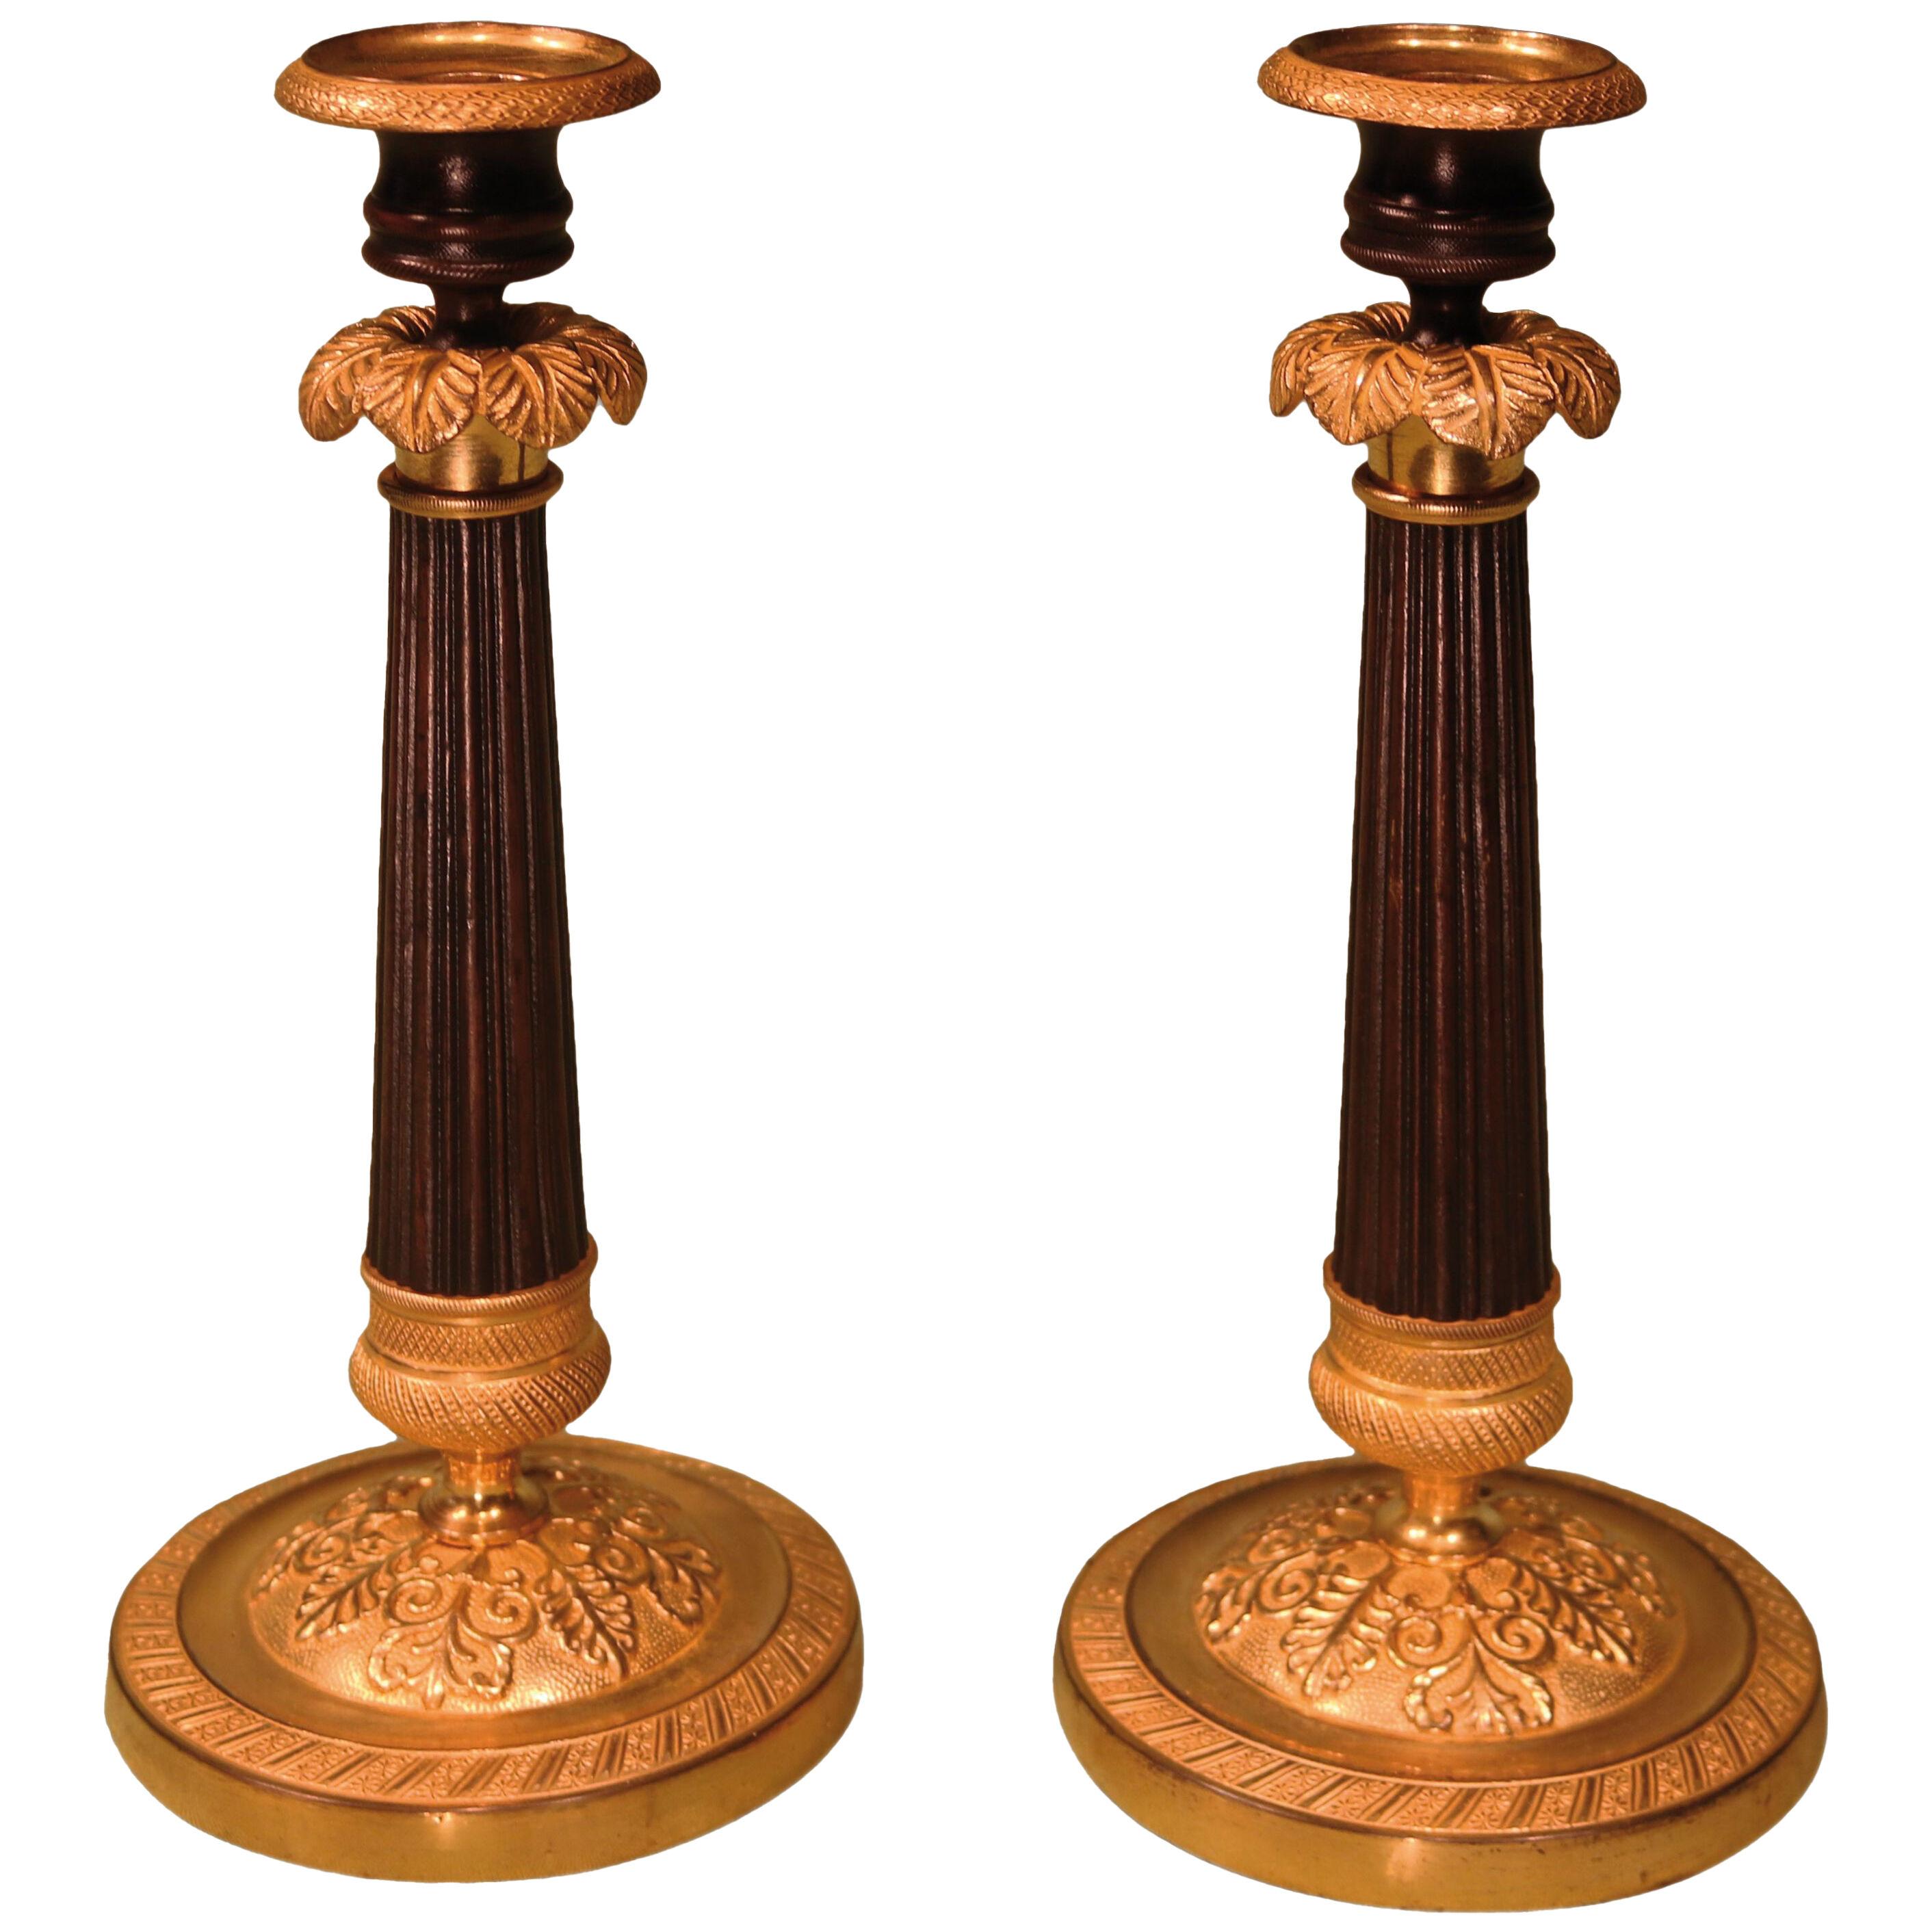 A pair of early 19th century Regency period bronze and ormolu candlesticks